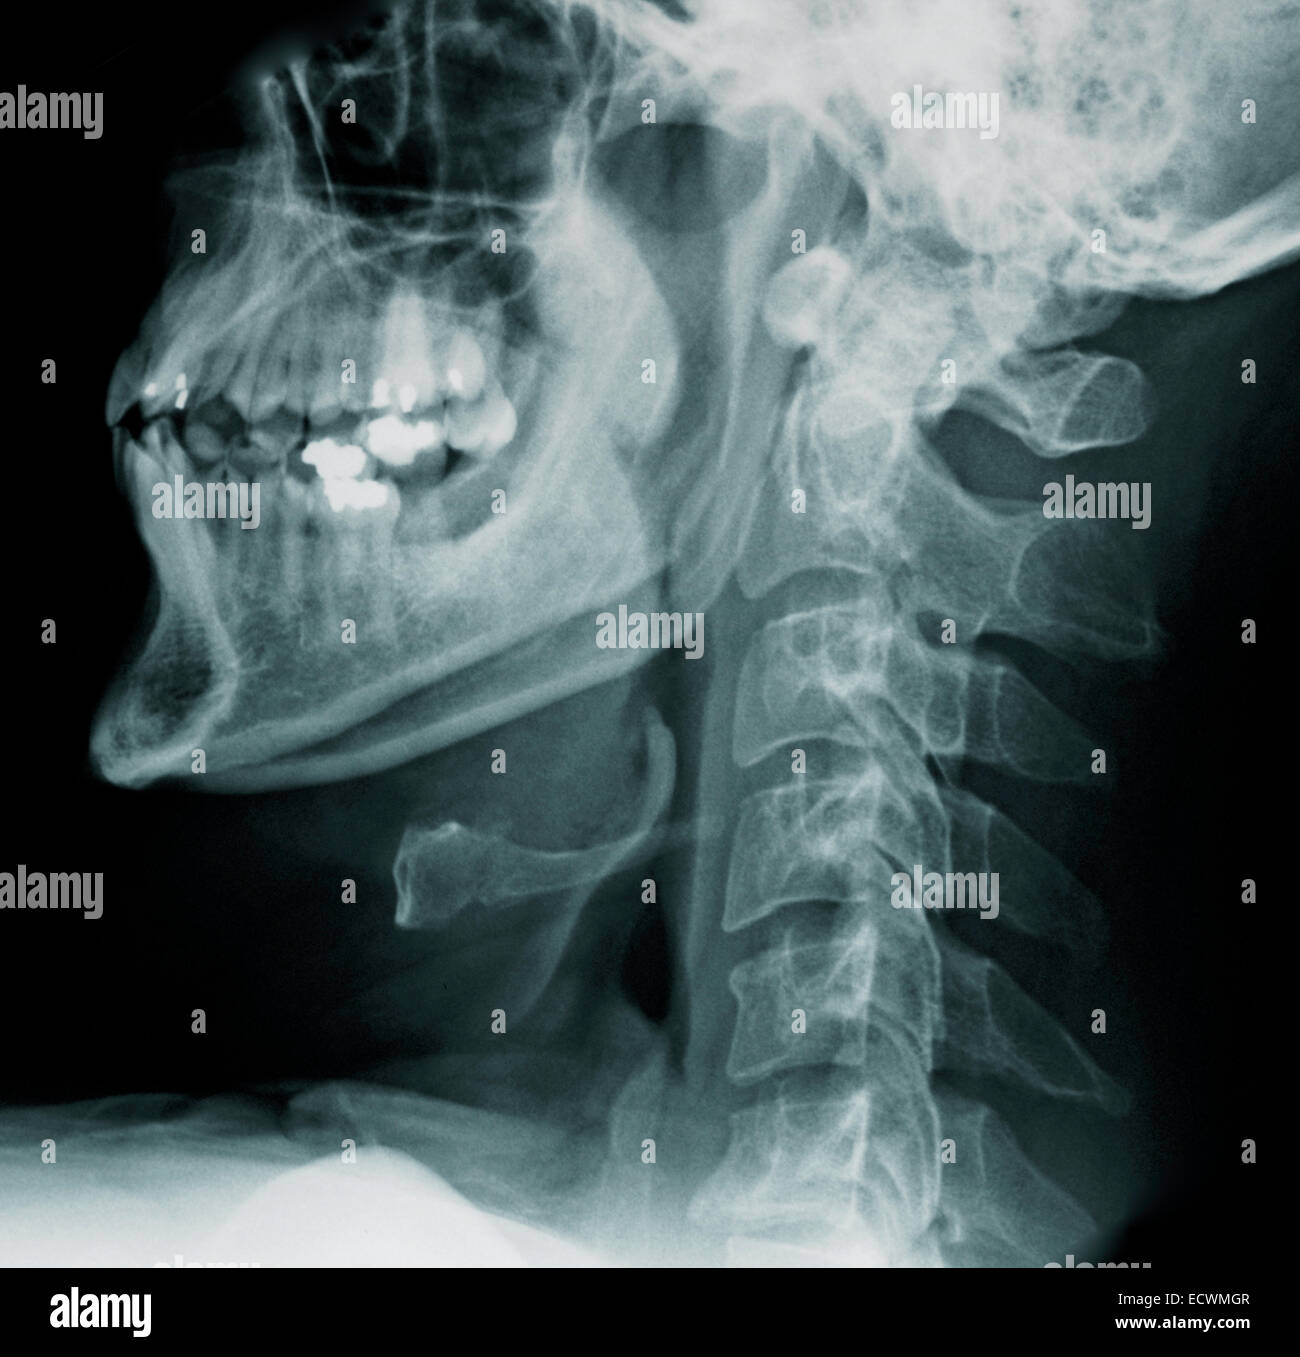 x ray odogs cervical spine